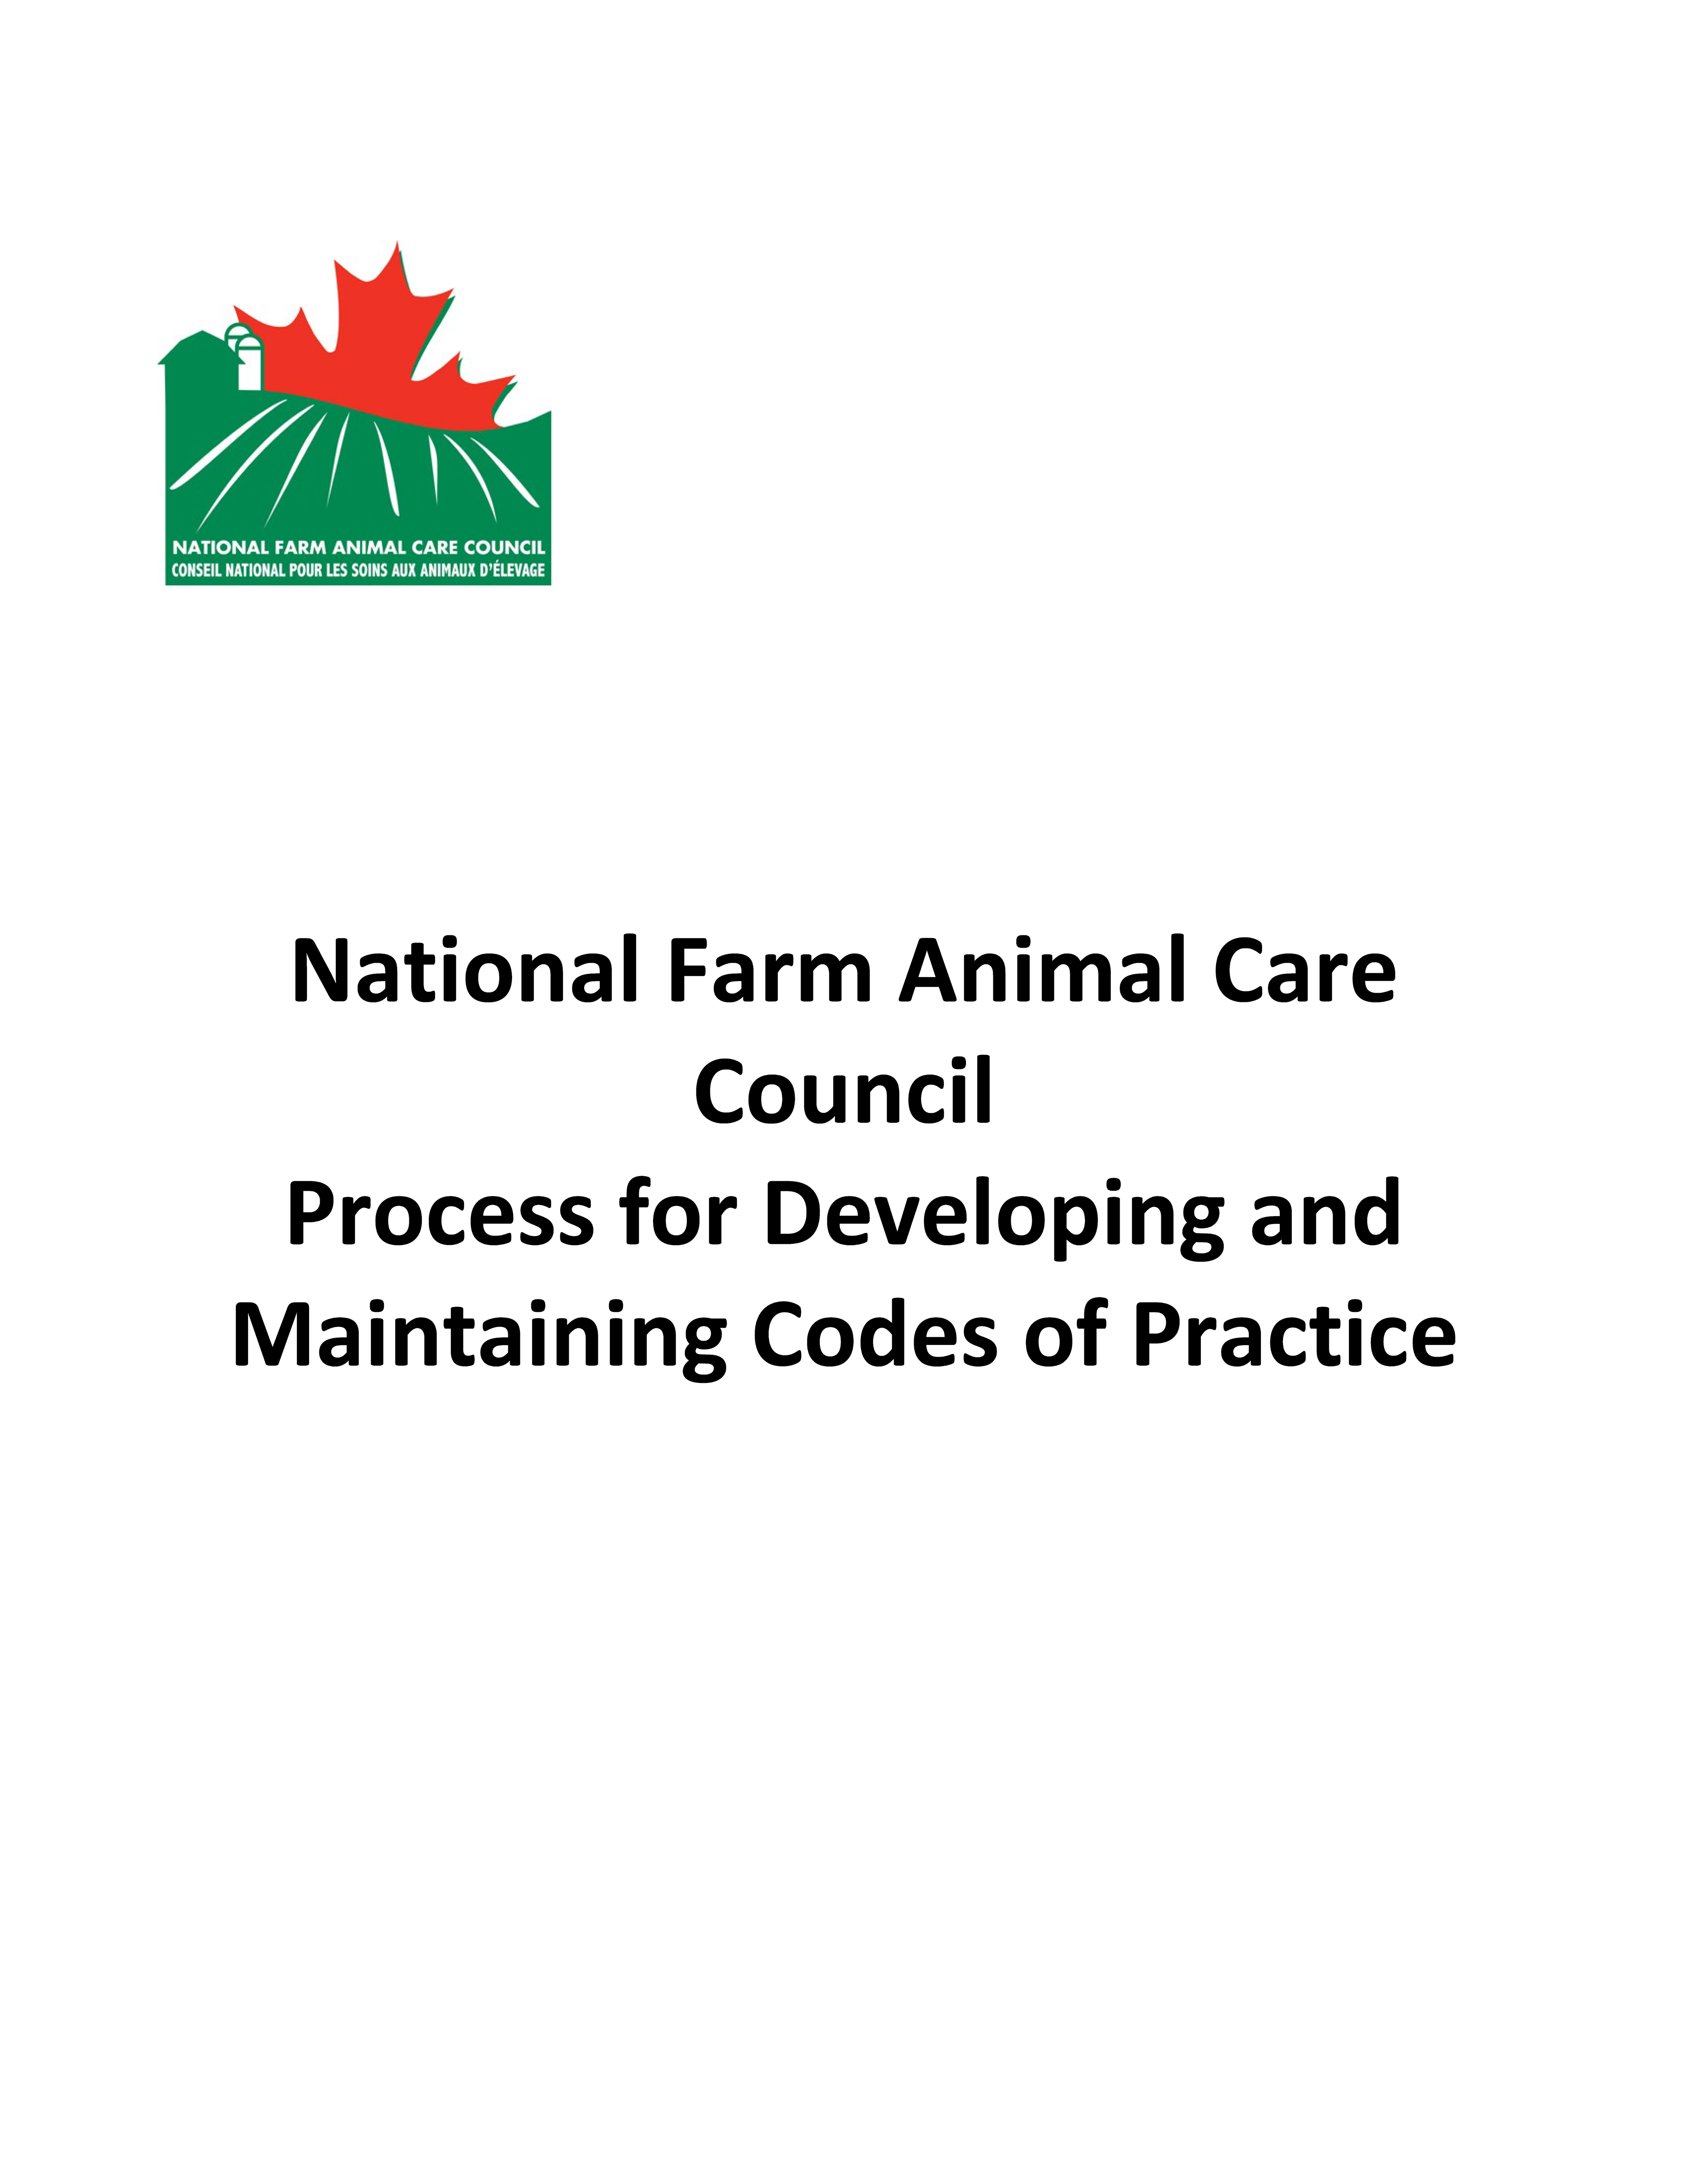 NFACC Process for Developing and Maintaining Codes of Practice